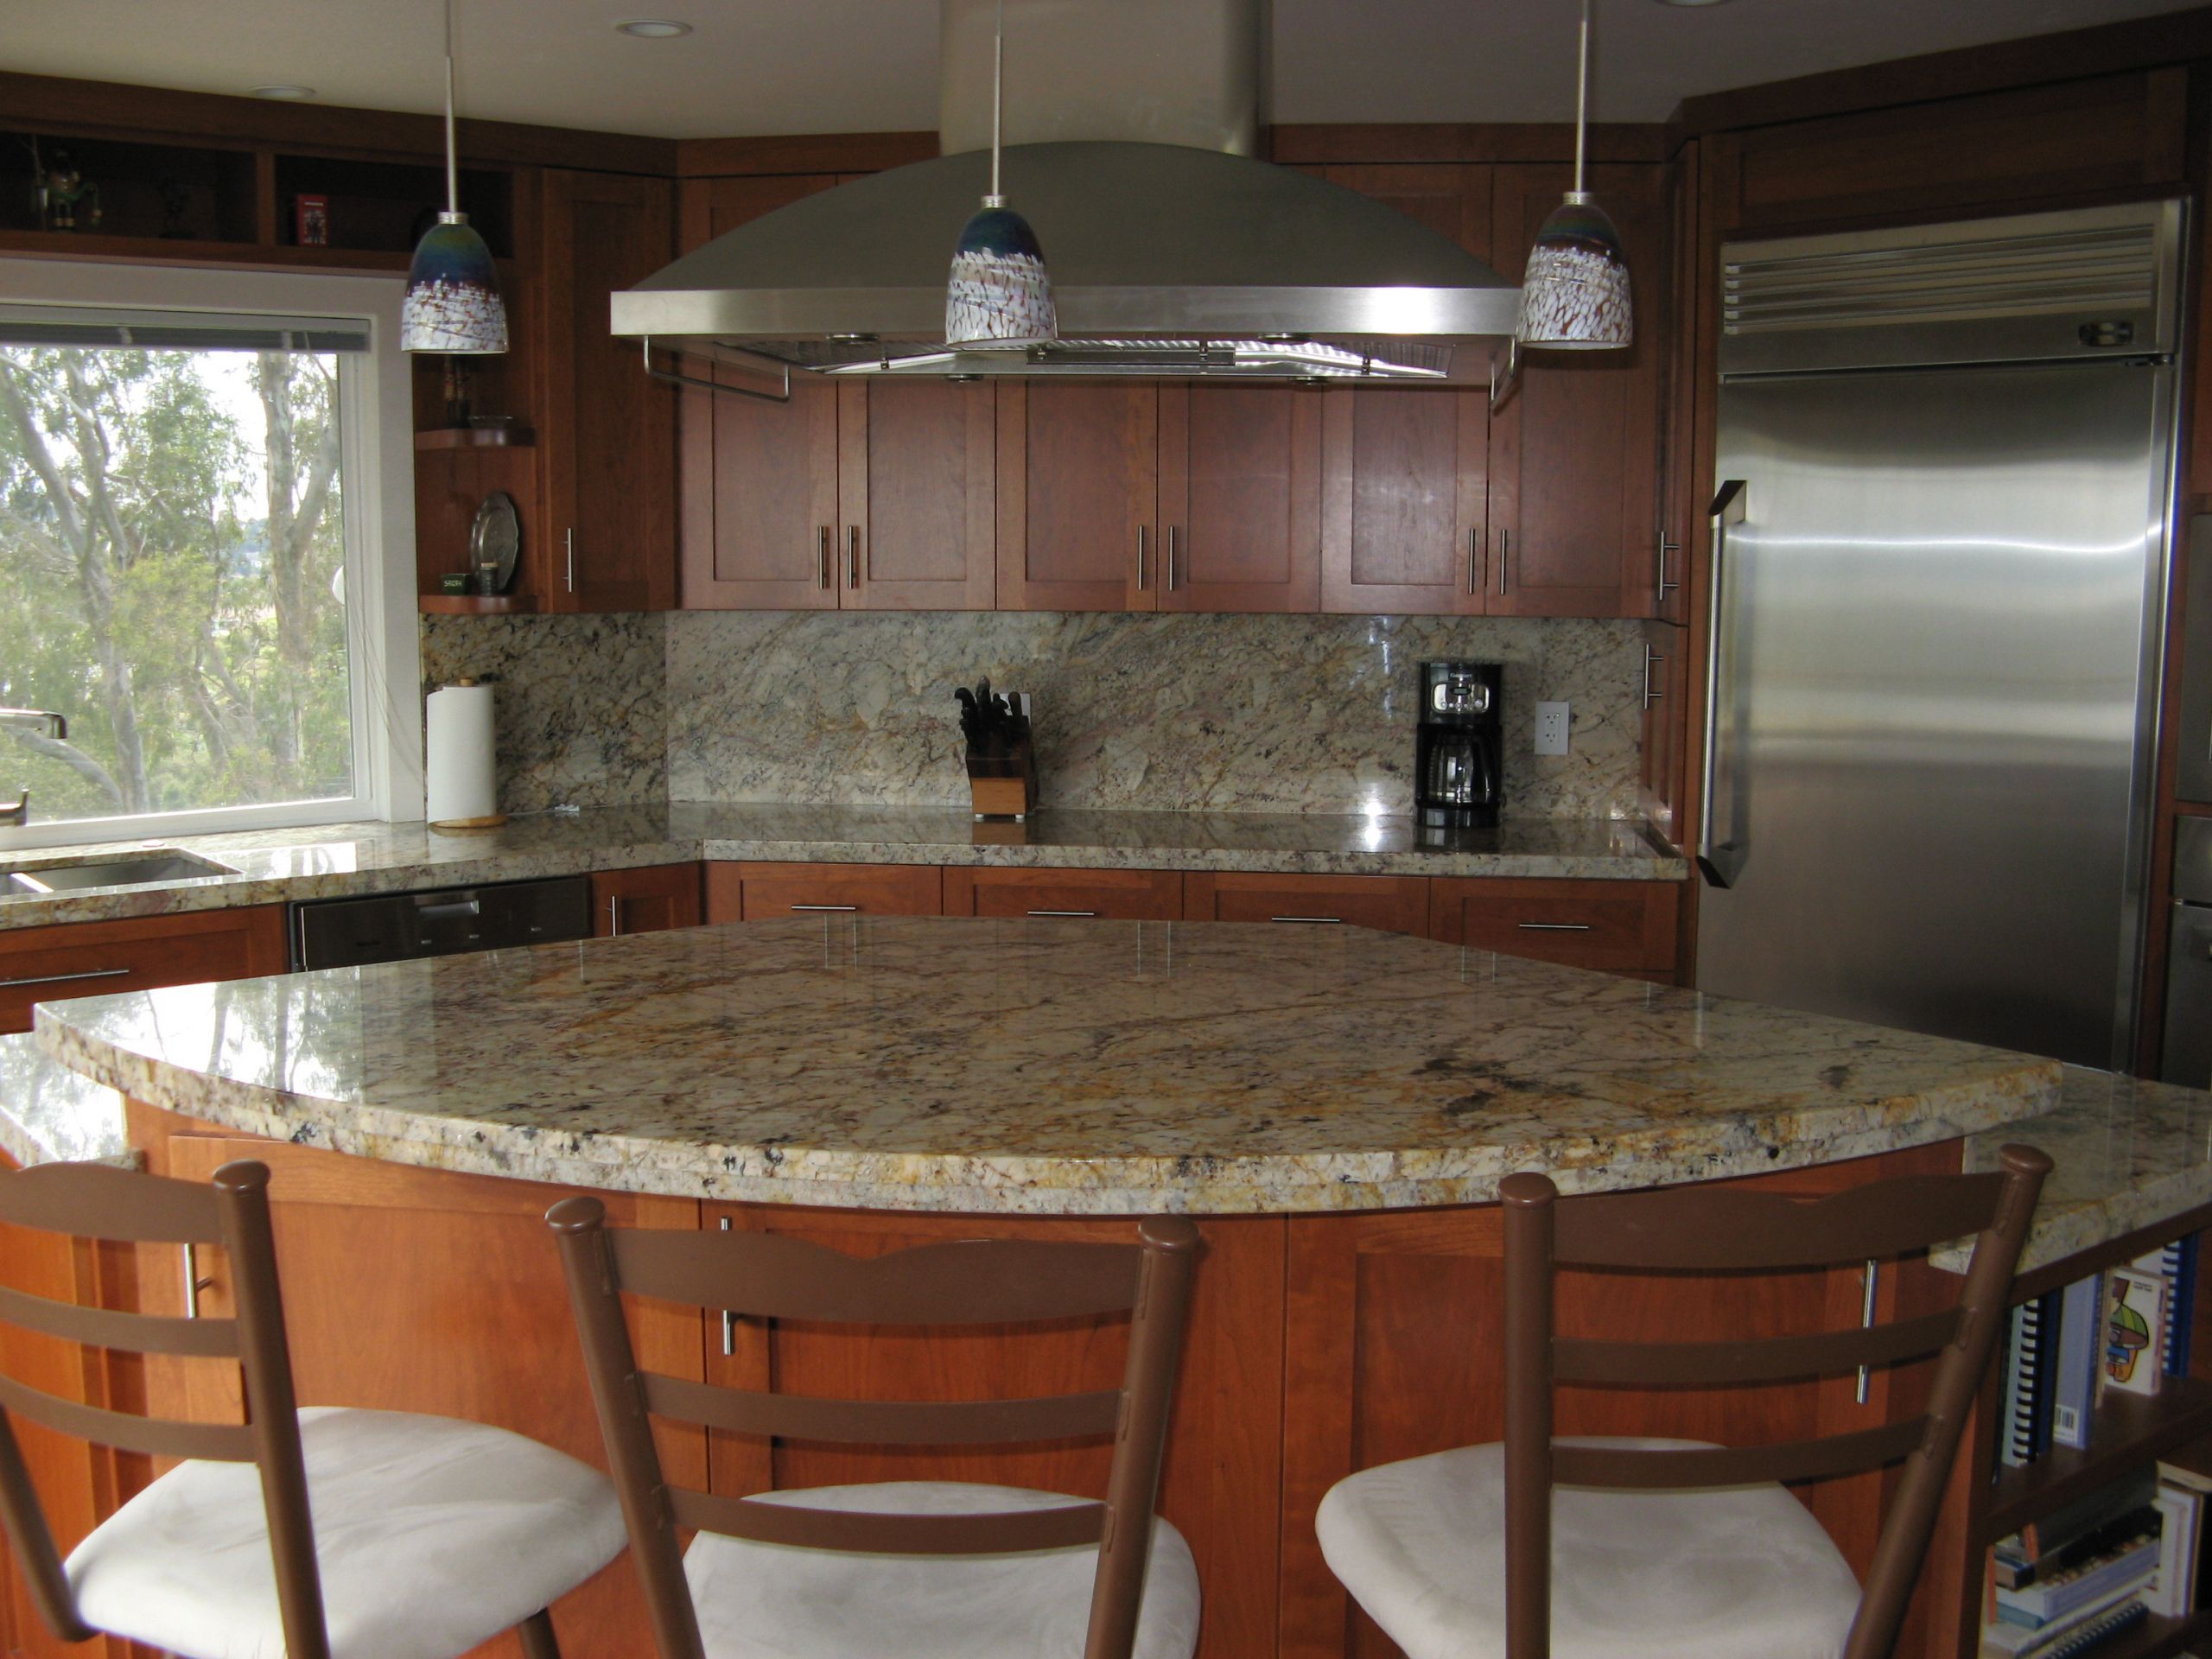 Kitchen Remodel Ideas Pictures
 Kitchen Remodeling Ideas & s